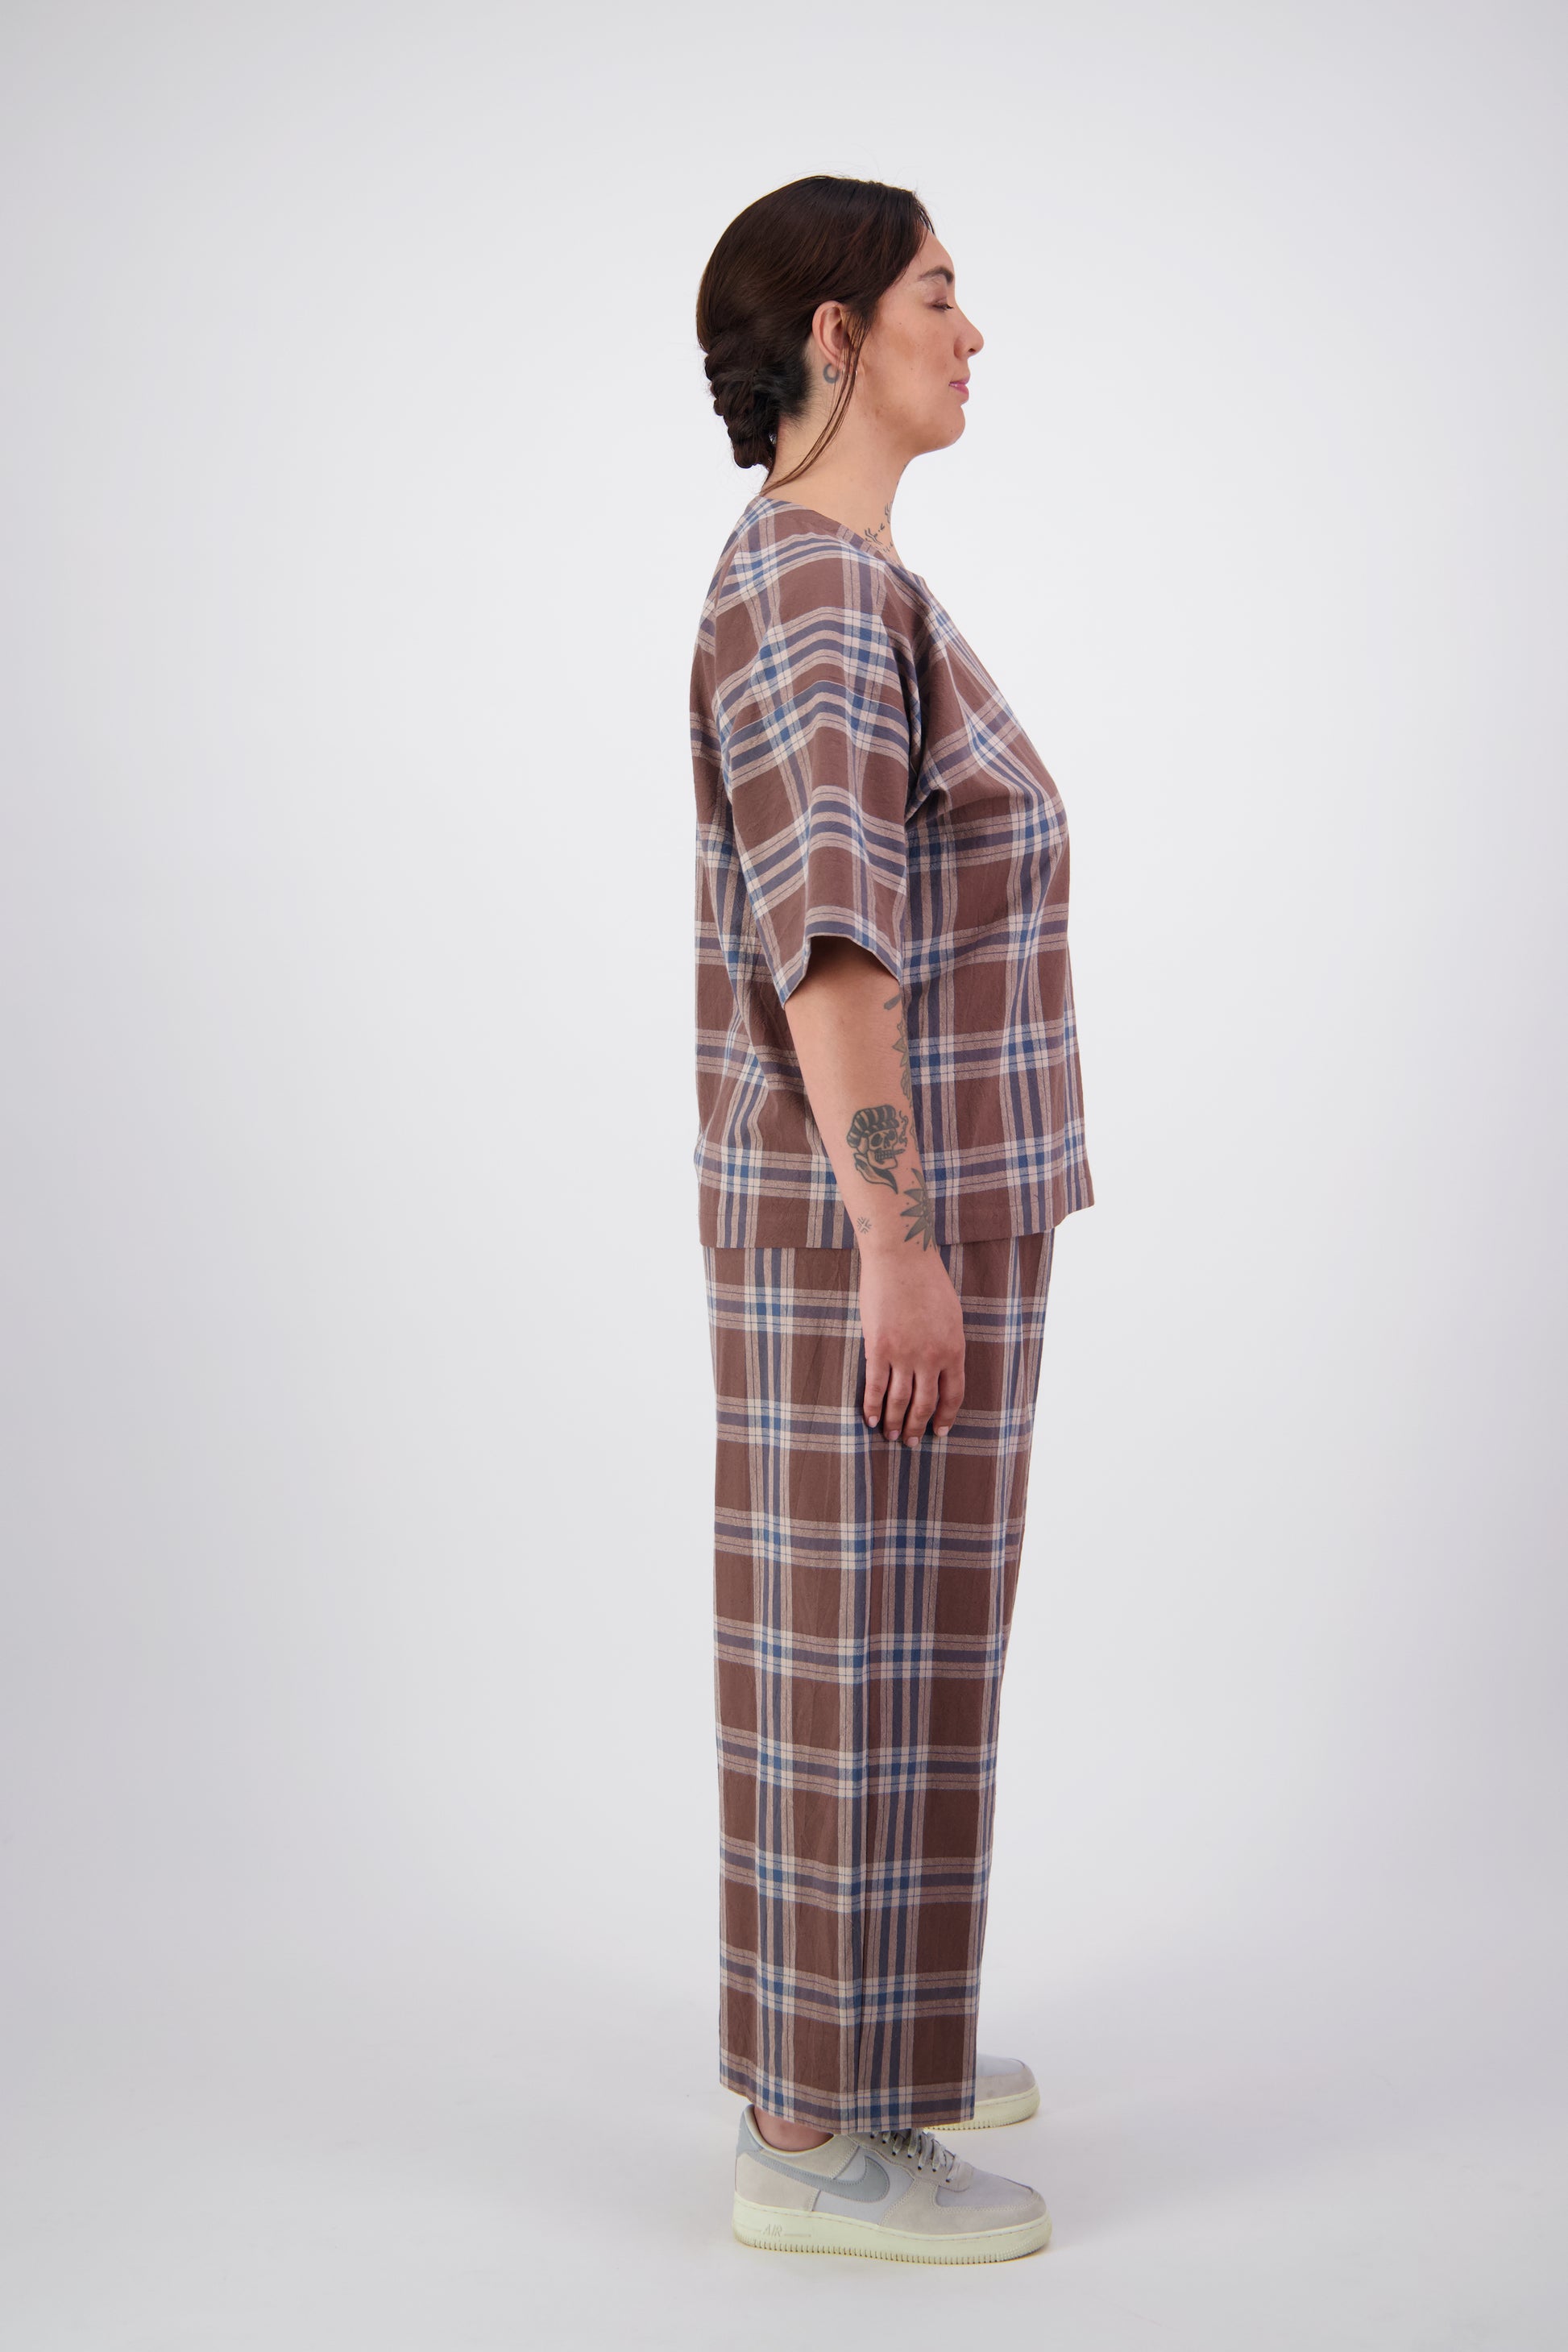 Arlena wearing brown plaid cotton loose fit pants with matching tee top